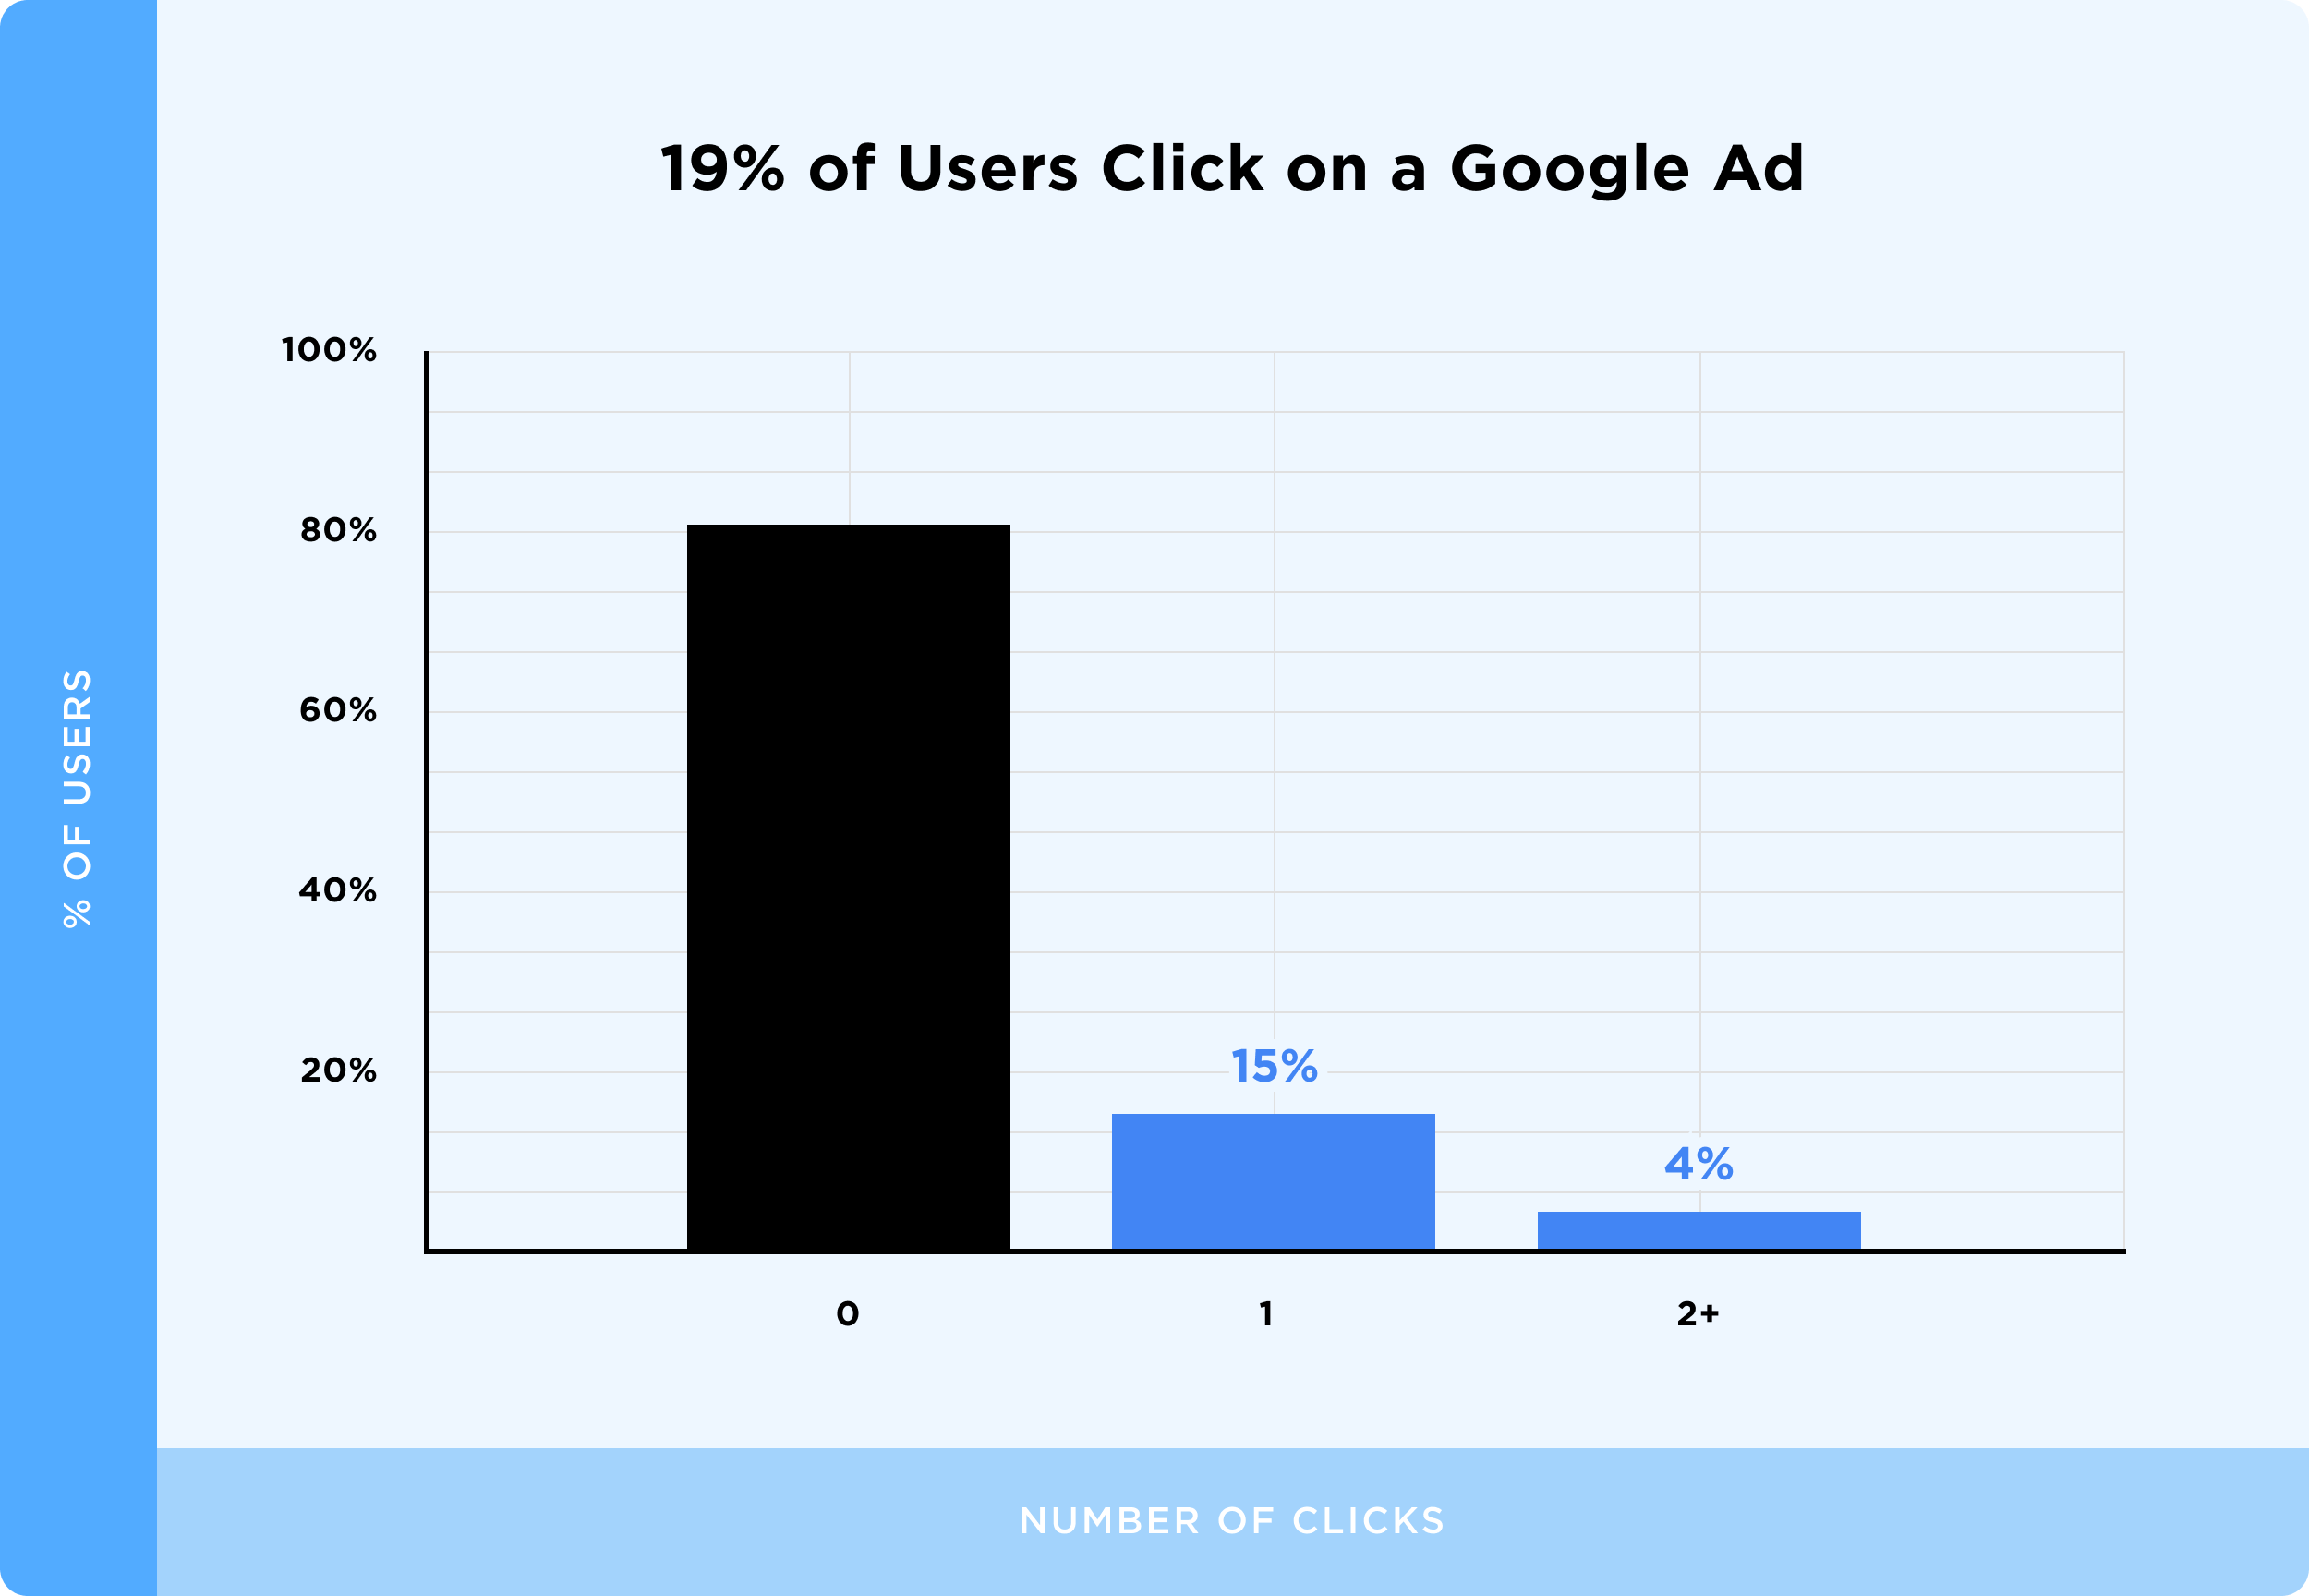 19% of Users Click On a Google Ad